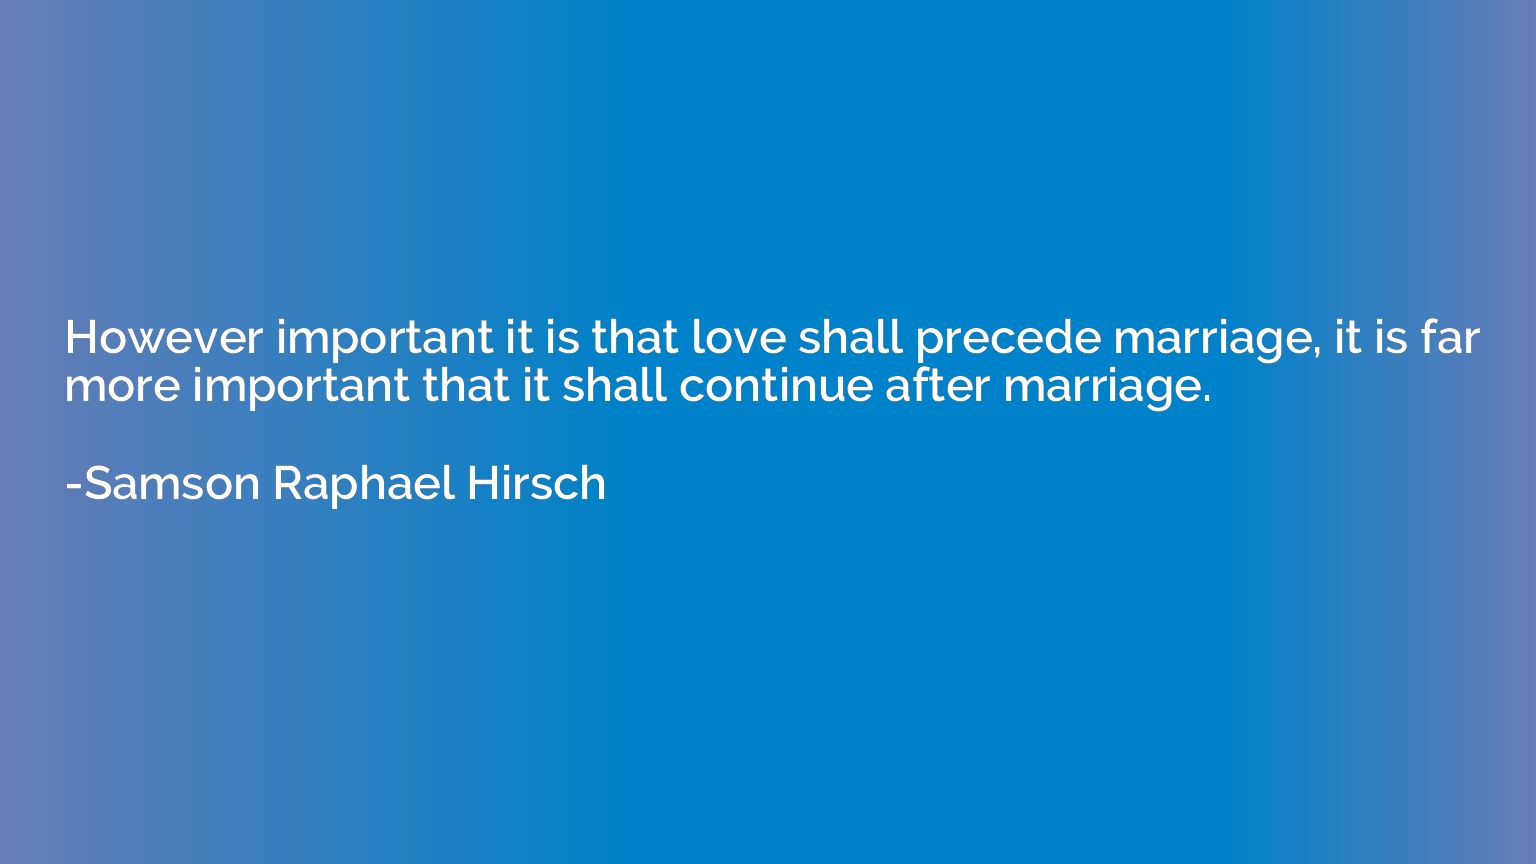 However important it is that love shall precede marriage, it